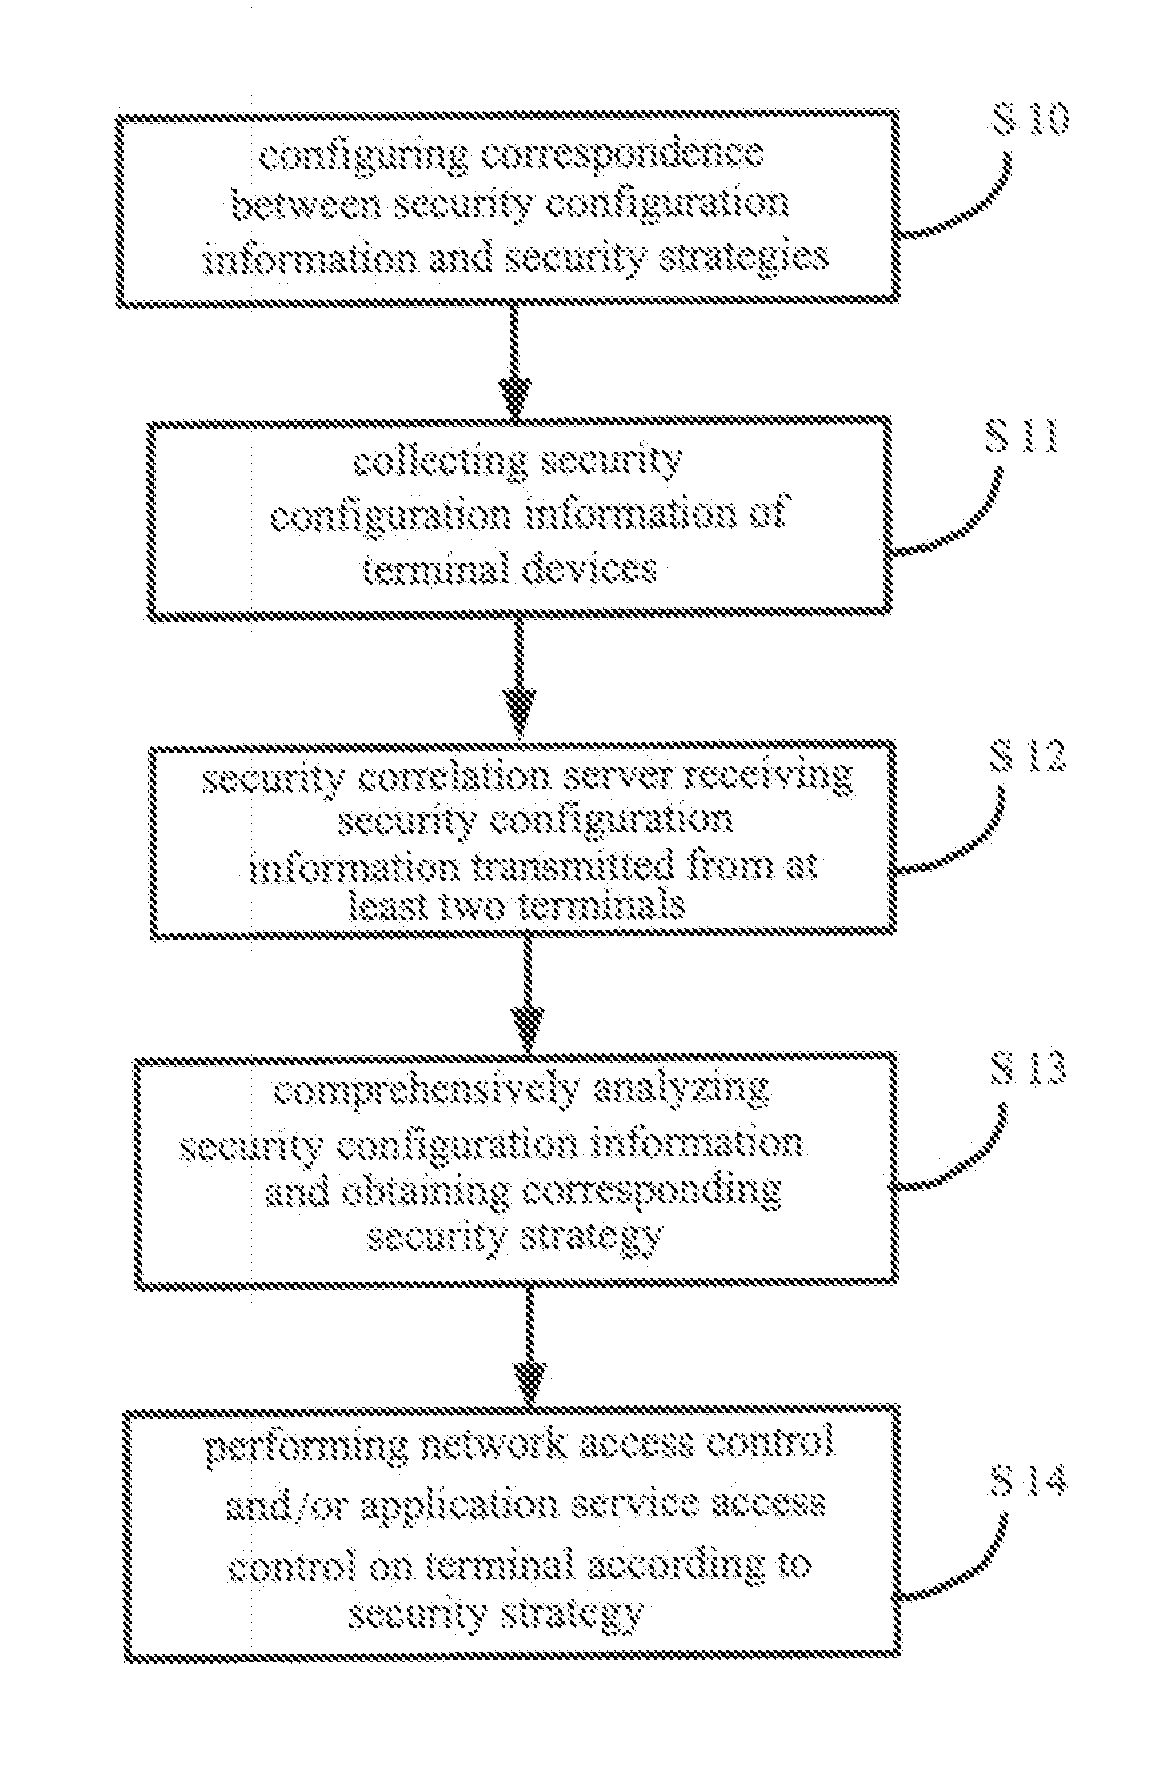 Method and System for Network Security Control